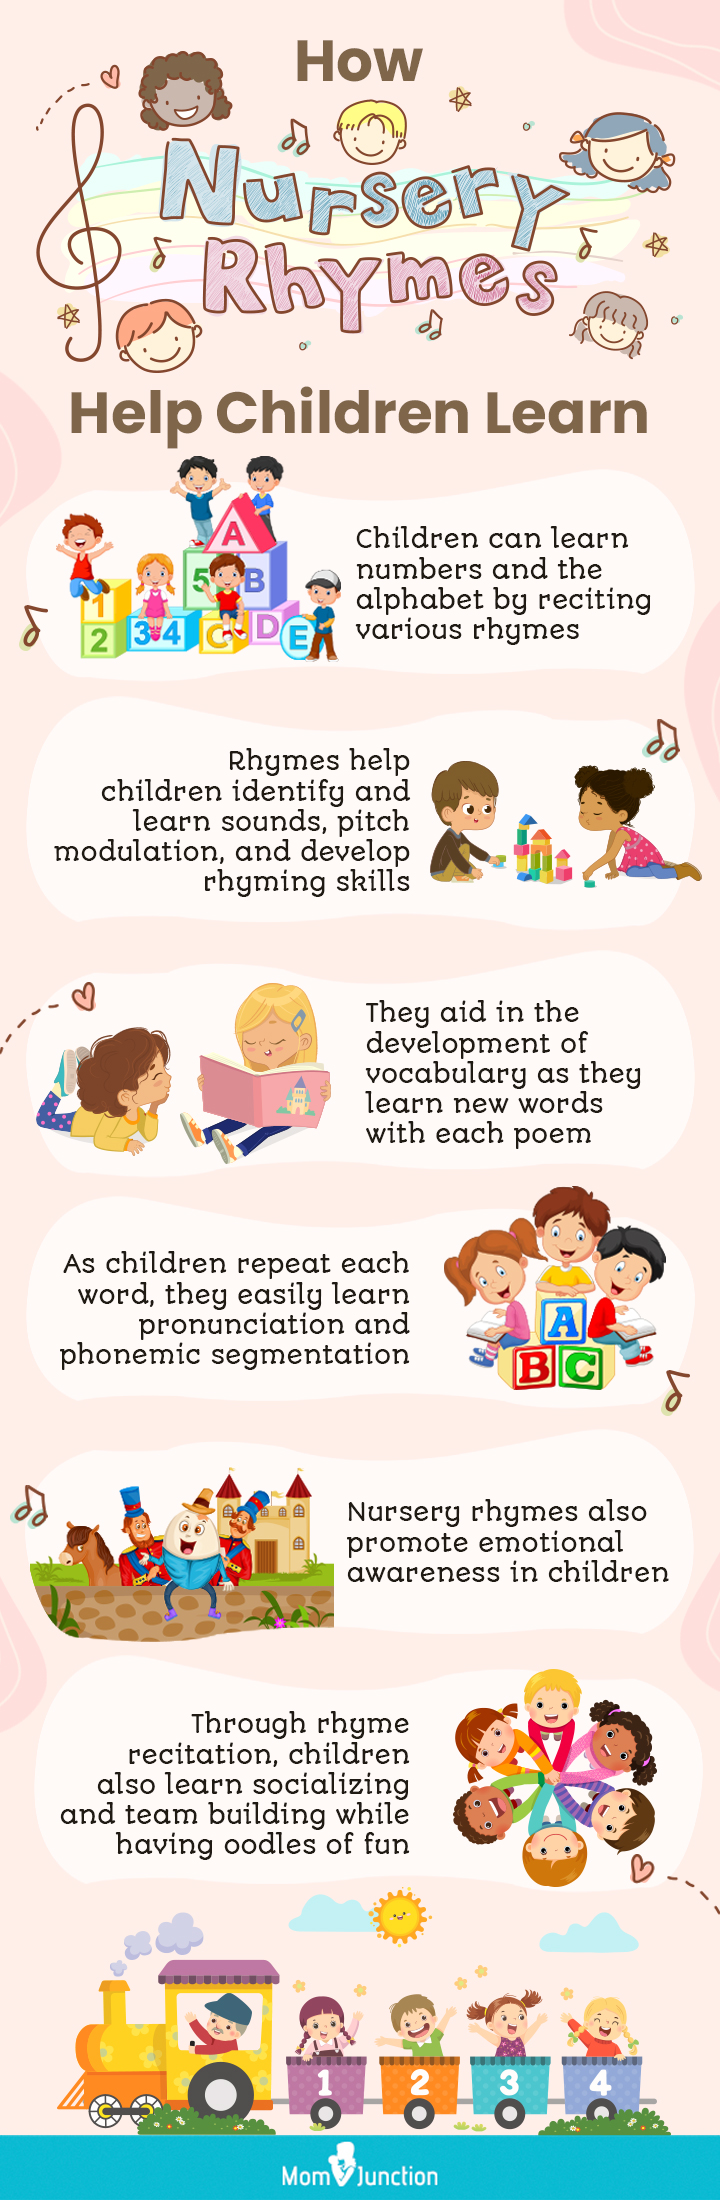 how nursery rhymes help children learn (infographic)